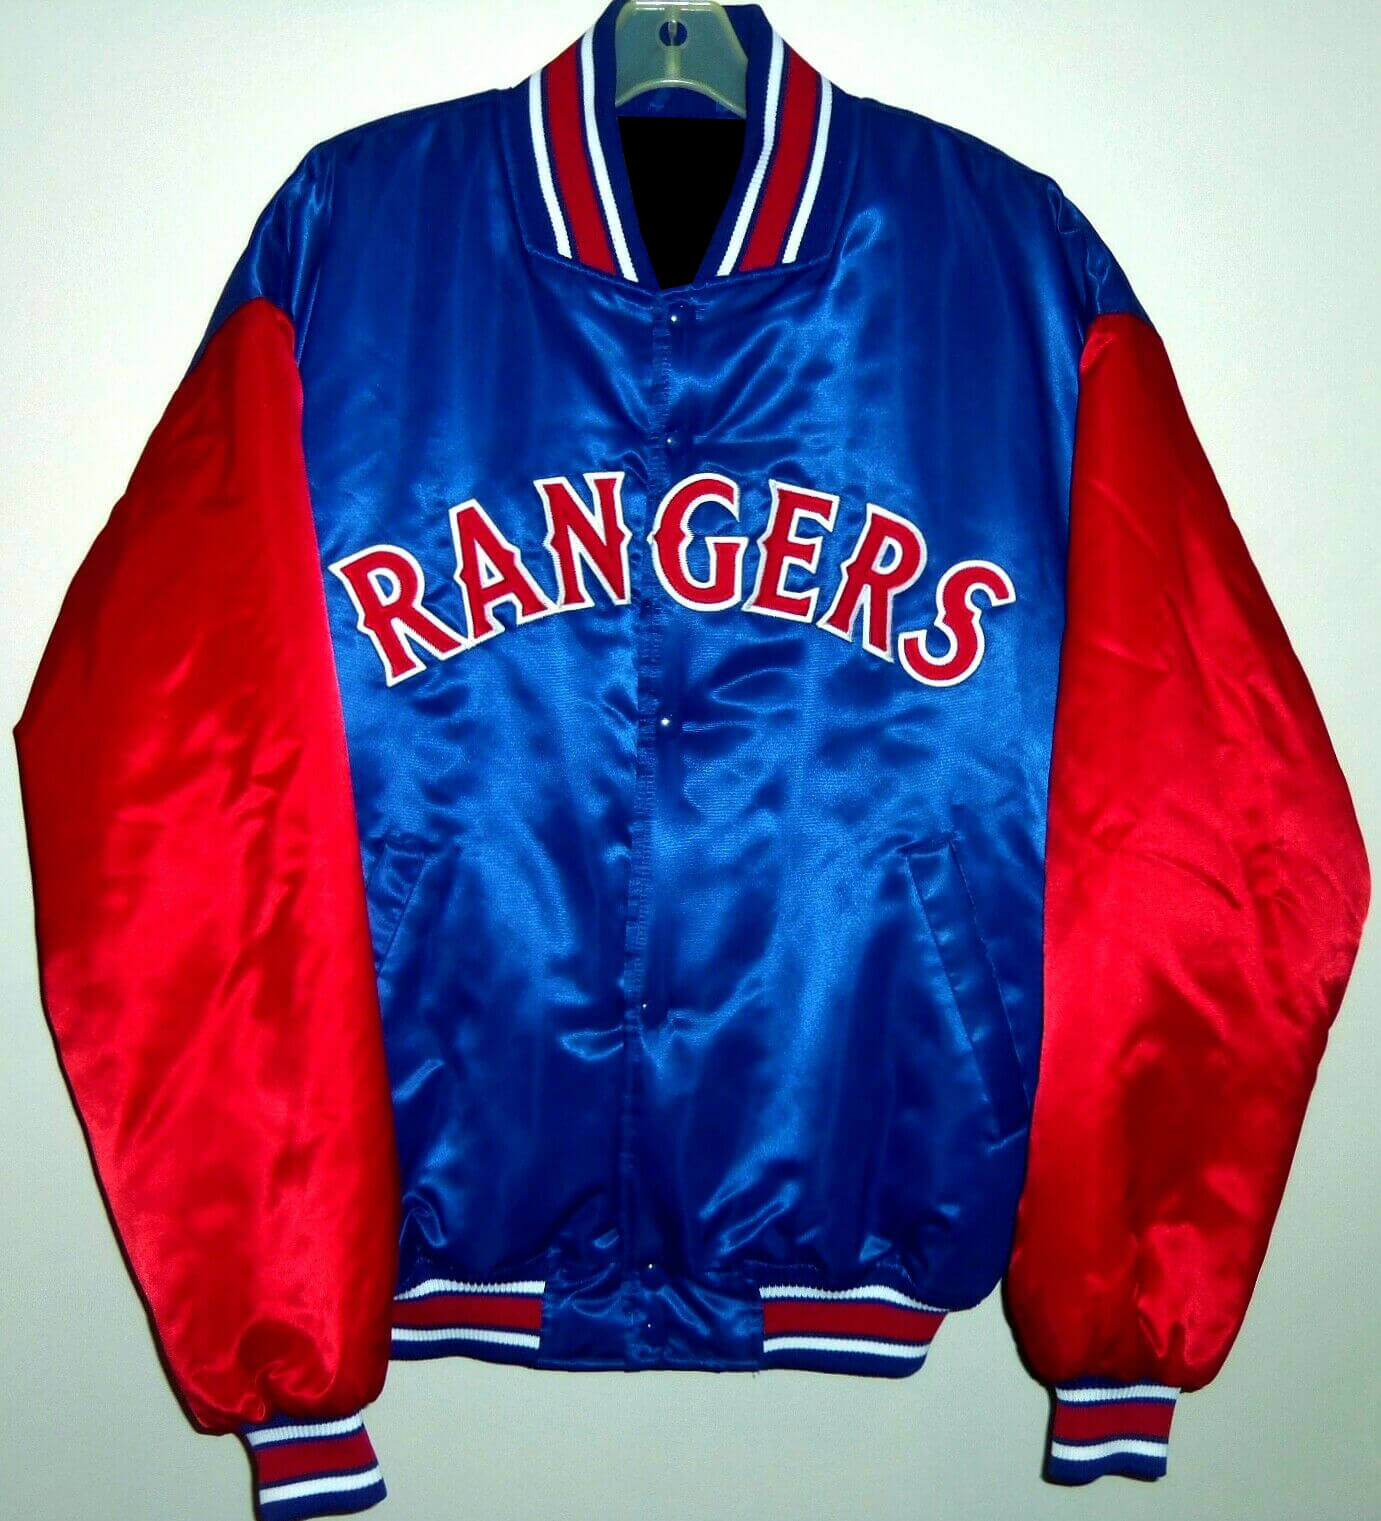 Maker of Jacket Sports Leagues Jackets MLB Texas Rangers Royal Blue and Red Satin